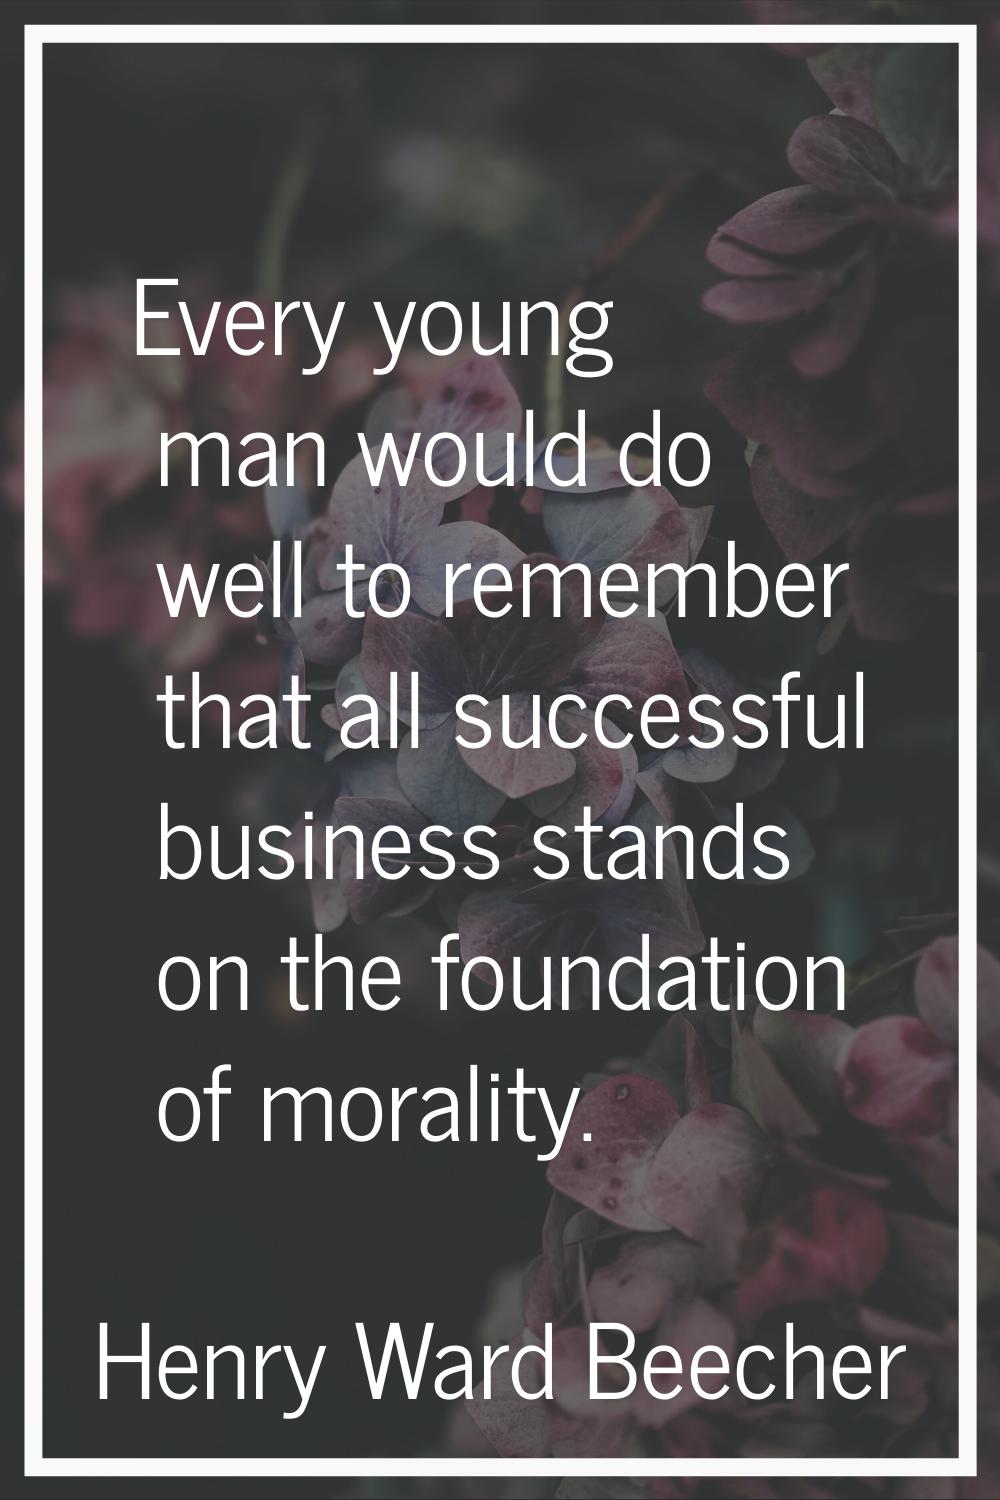 Every young man would do well to remember that all successful business stands on the foundation of 